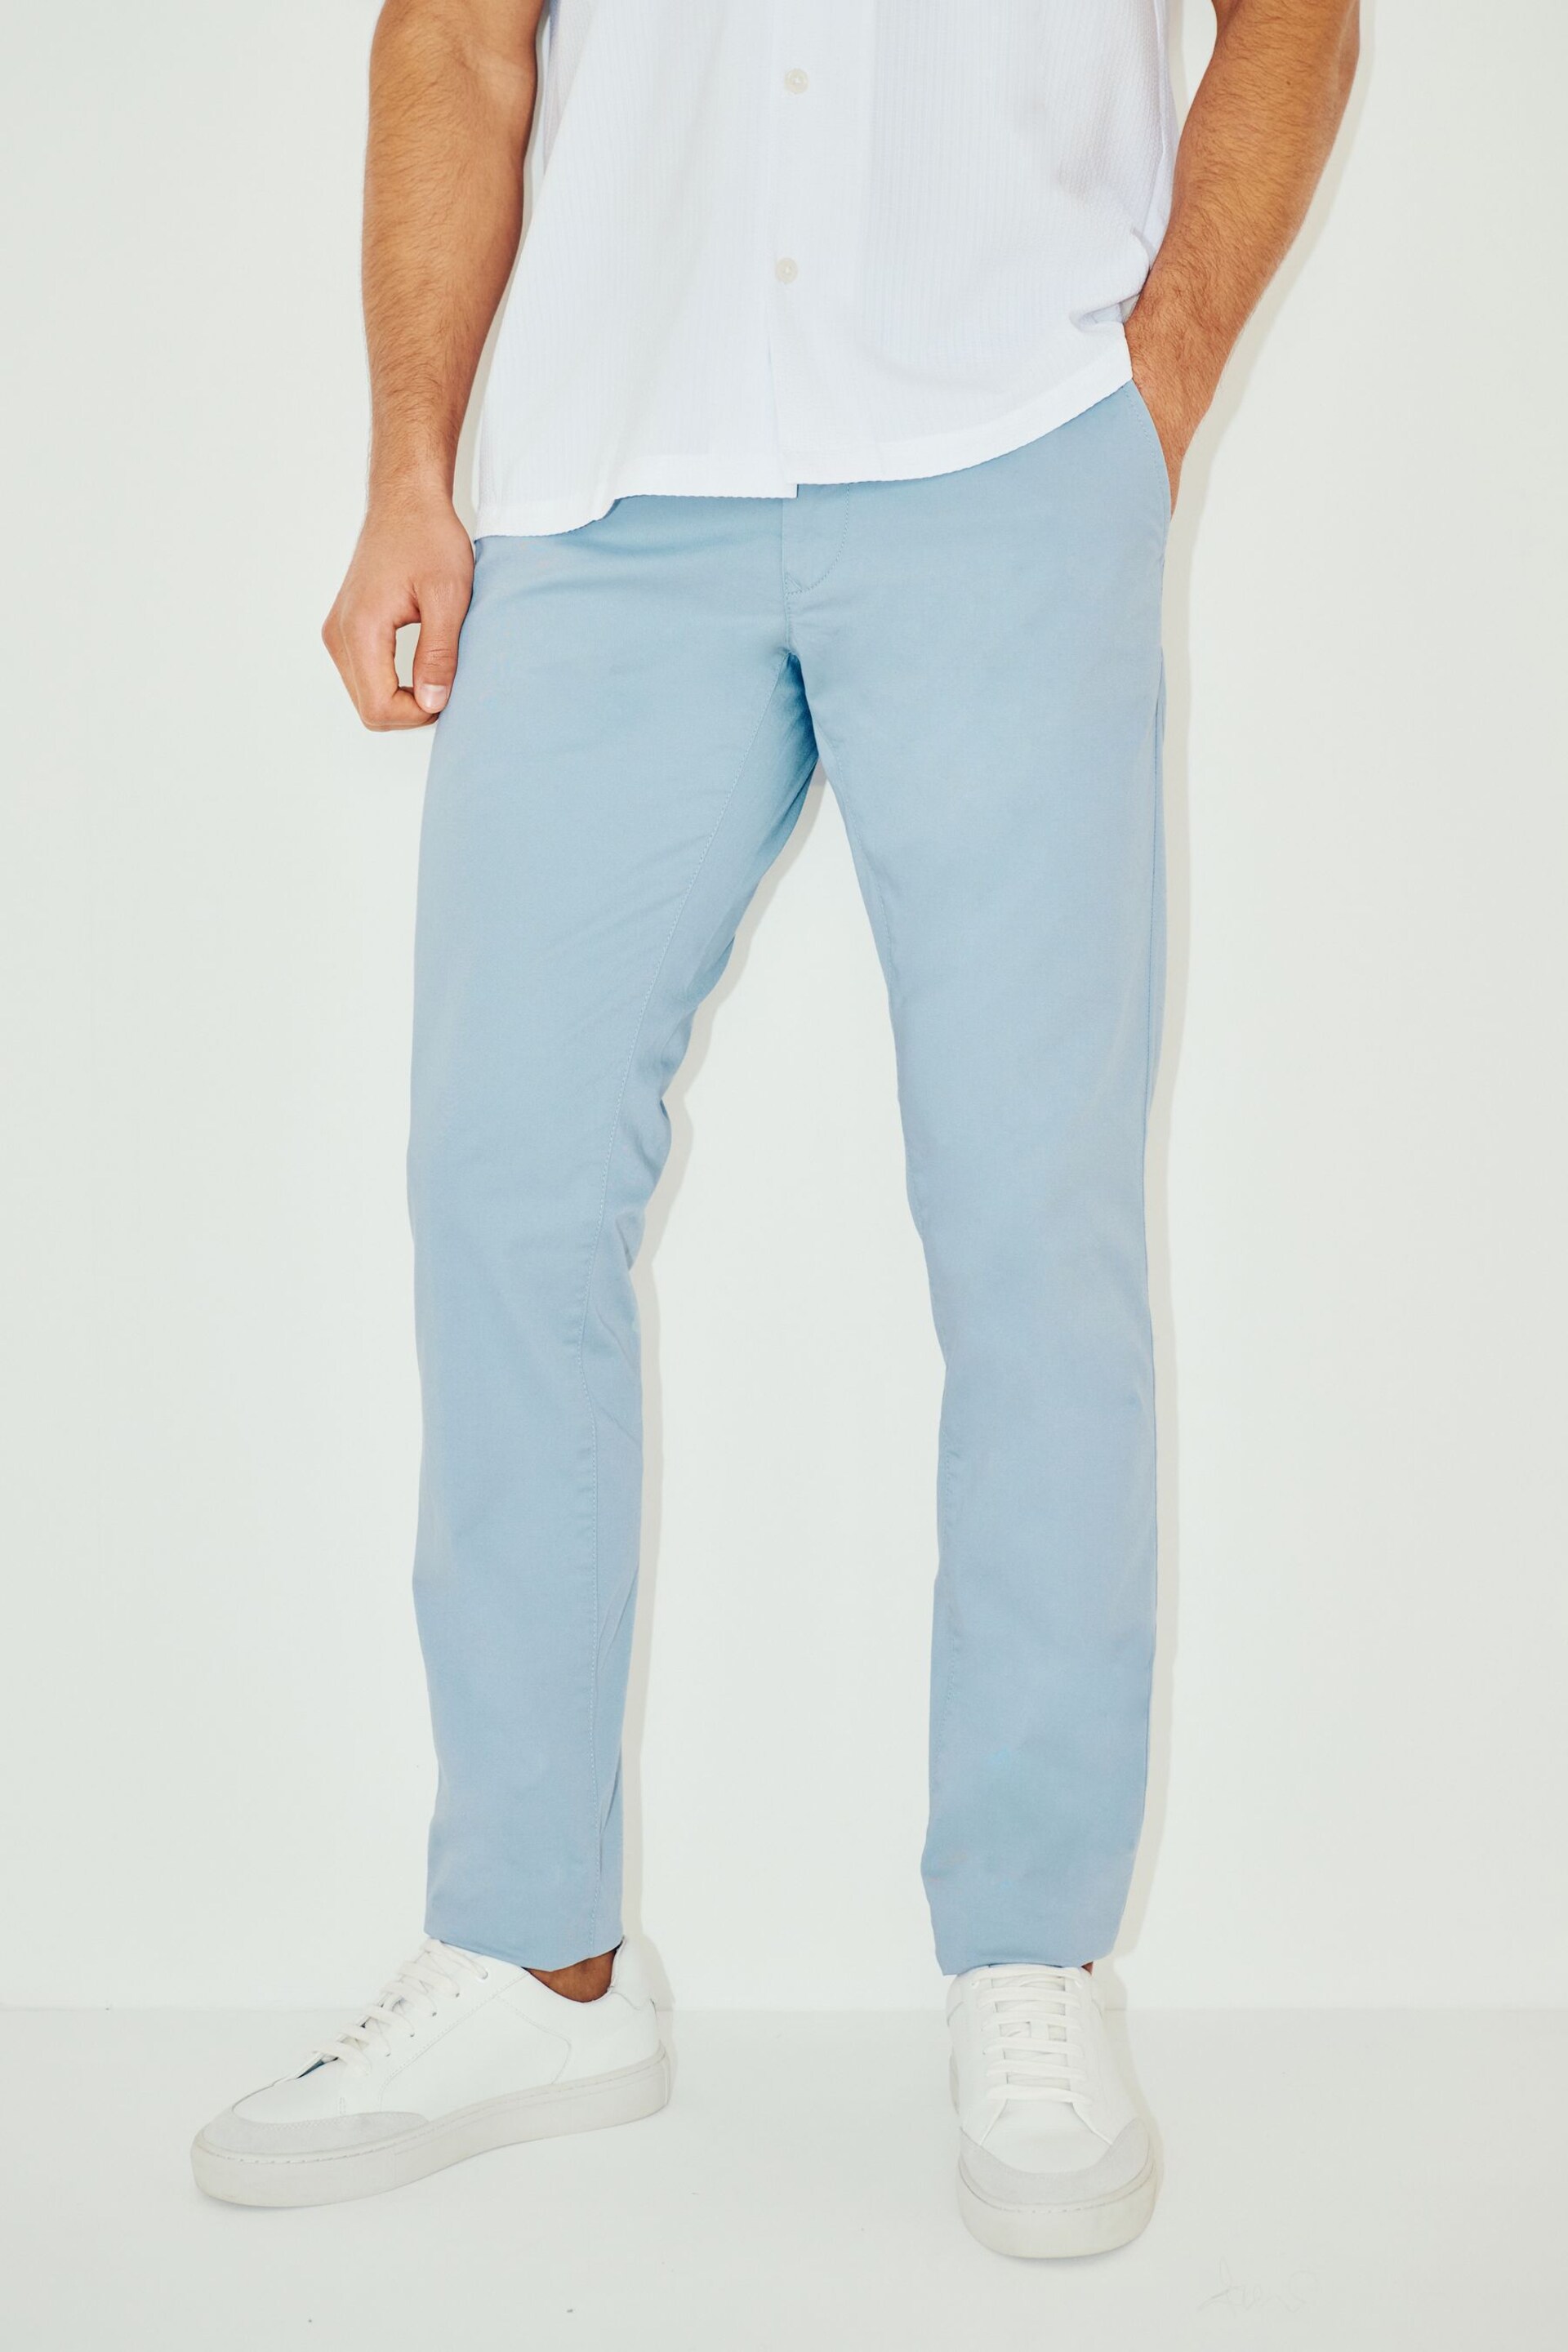 GANT Blue Slim Fit Cotton Twill Chino Trousers - Image 1 of 5